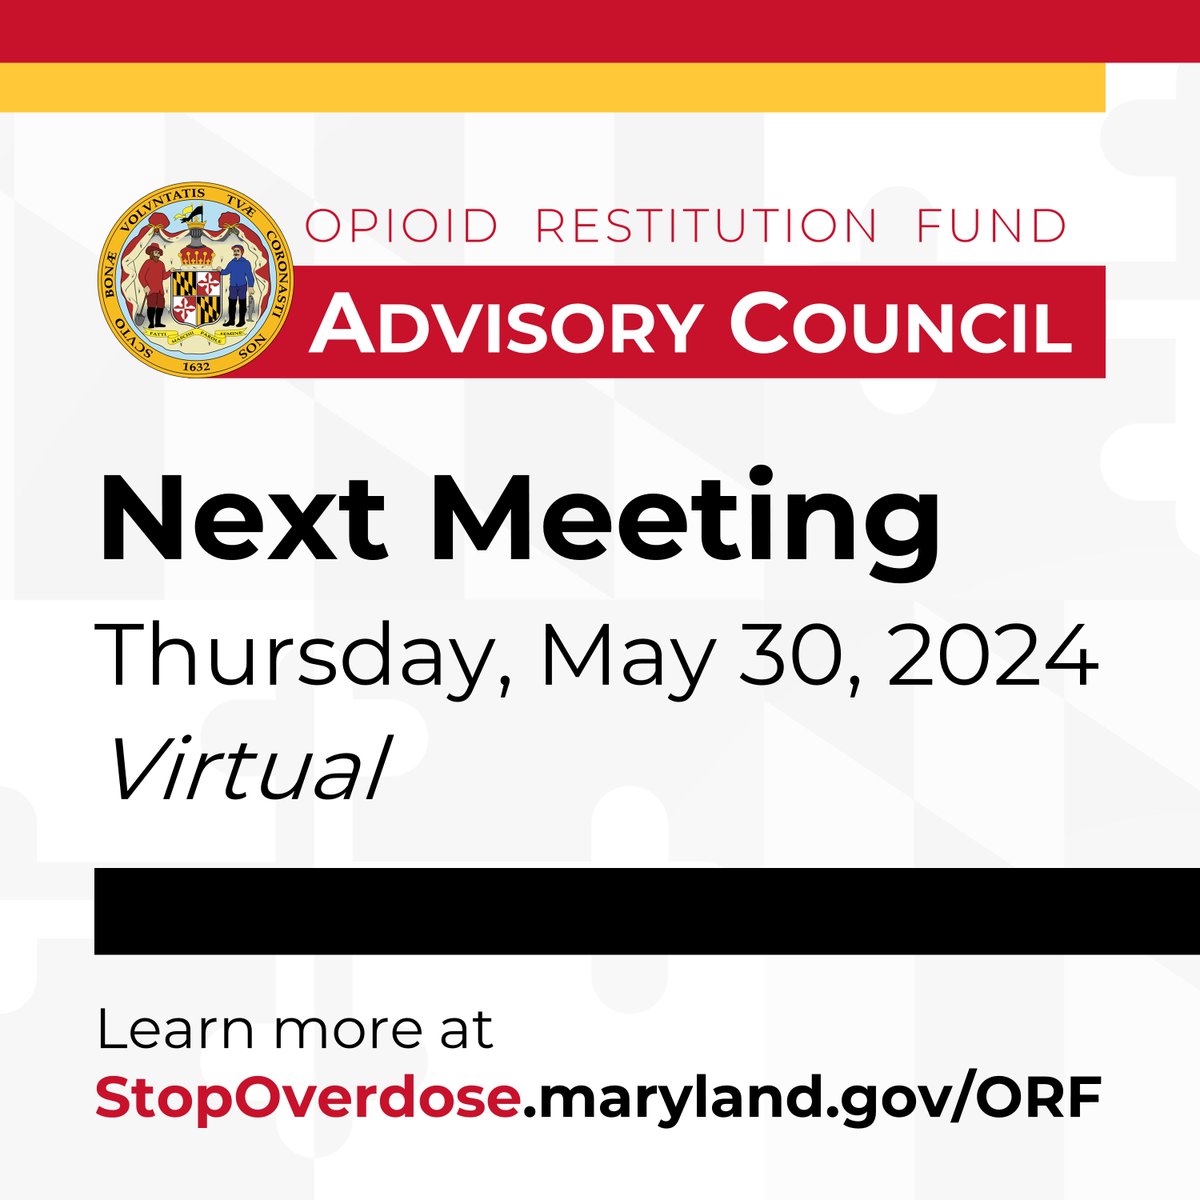 The next meeting of the Opioid Restitution Fund Advisory Council will be Thurs., 5/30, from 10–11 am! This meeting will feature an important presentation by Sec. Laura Herrera Scott of @MDHealthDept. Visit StopOverdose.maryland.gov/ORF for details on how to tune in. #StopOverdoseMD